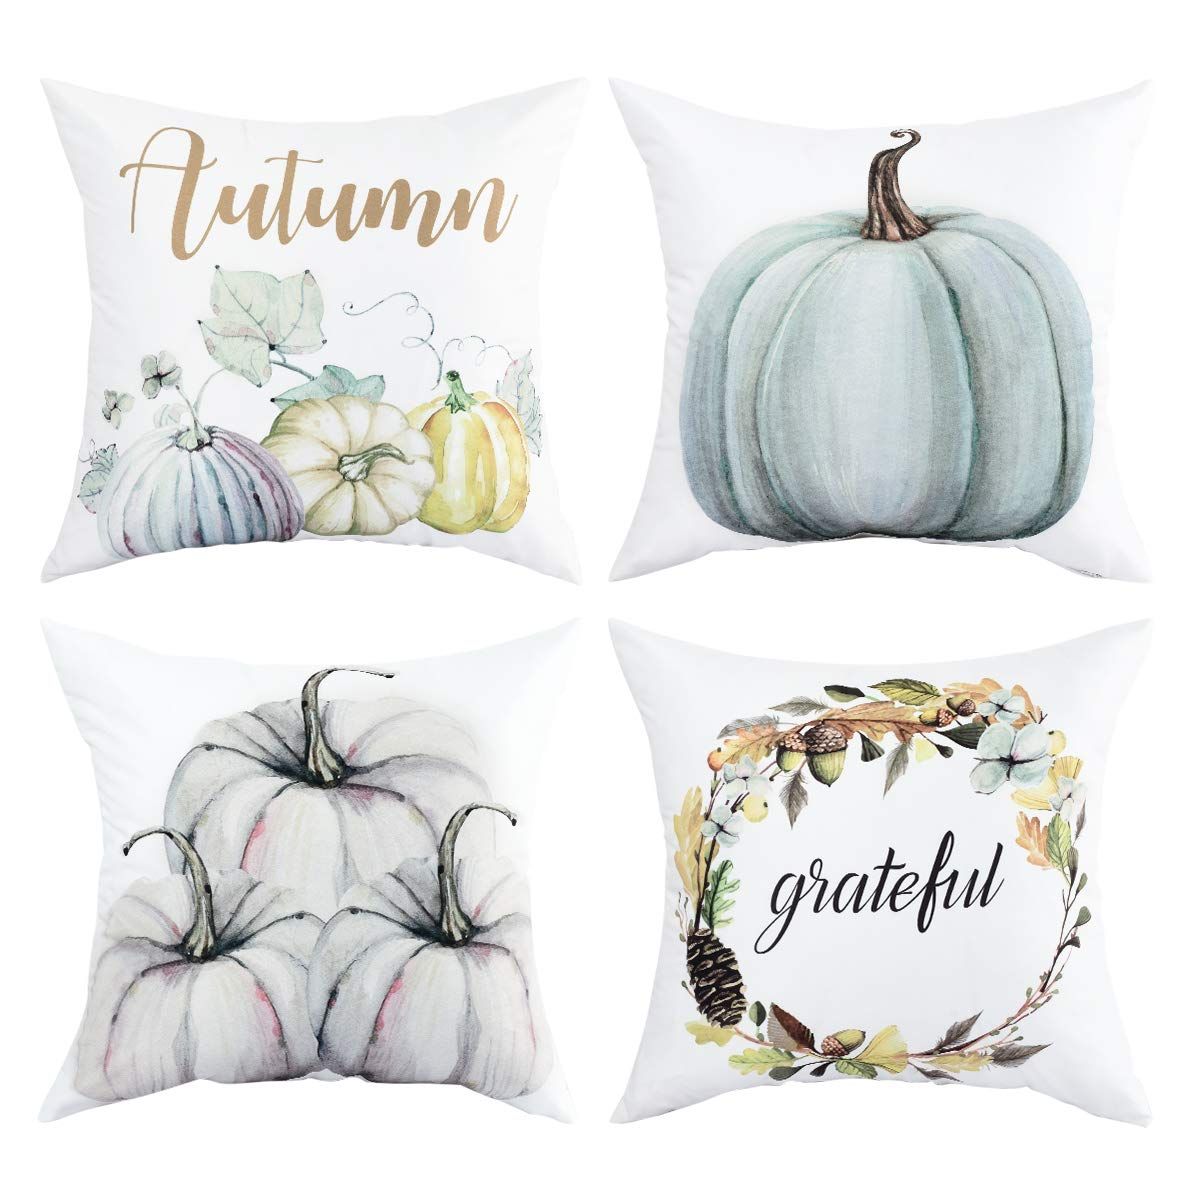 Yastouay Autumn Decorations Pumpkin Throw Pillow Cover Cushion Couch Cover Pillow Cases Set of 4 for | Amazon (US)